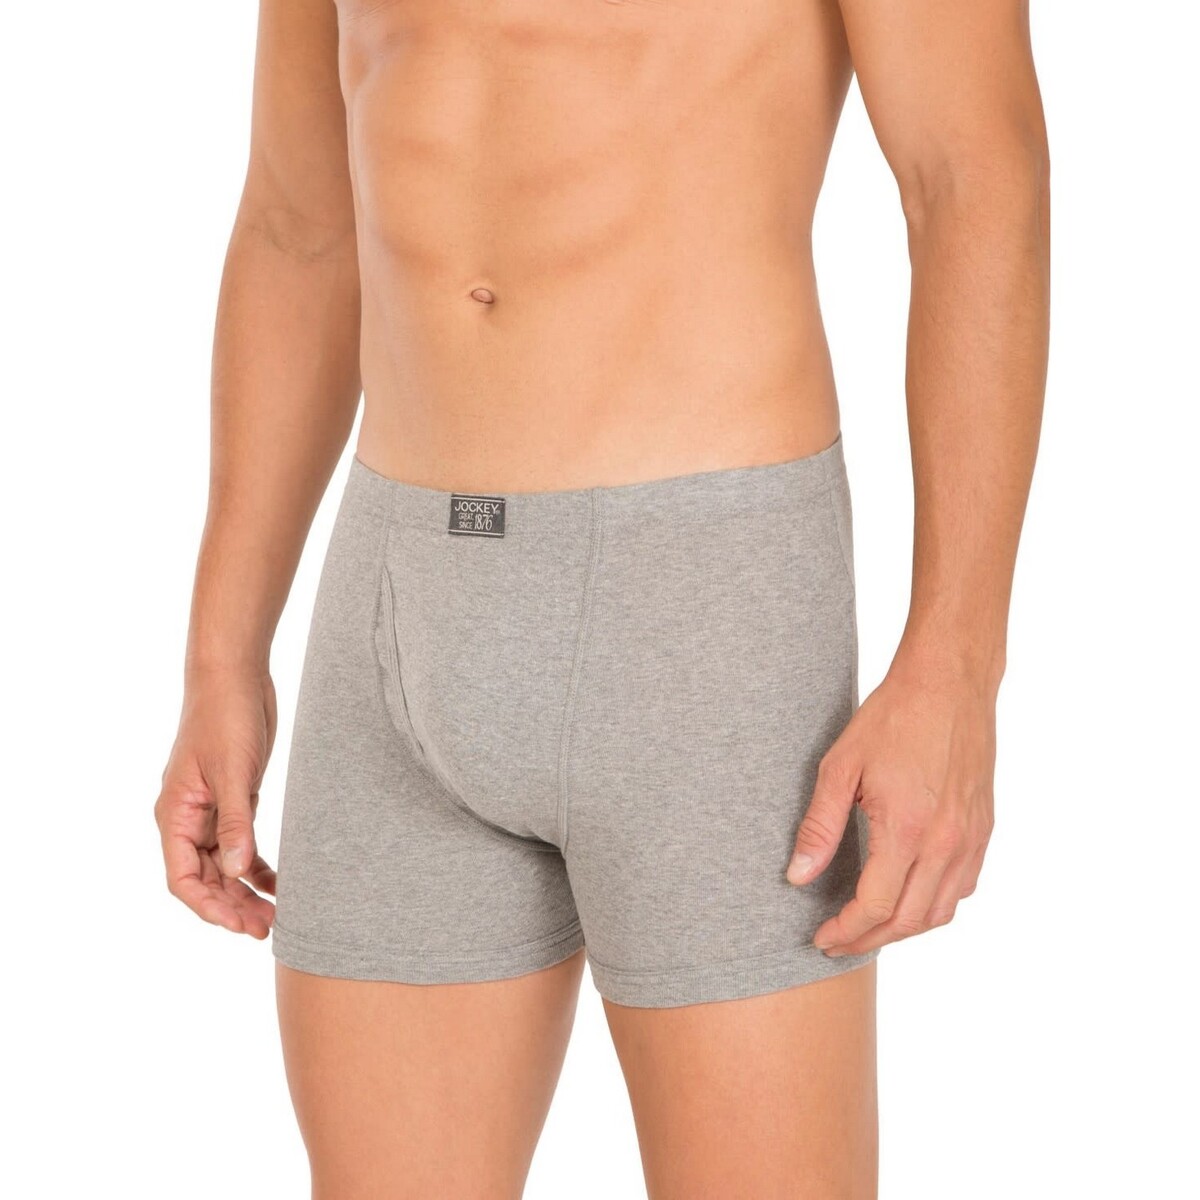 JOCKEY Mens Boxer Brief 8008 2Pc ASSORTED EXTRA LARGE